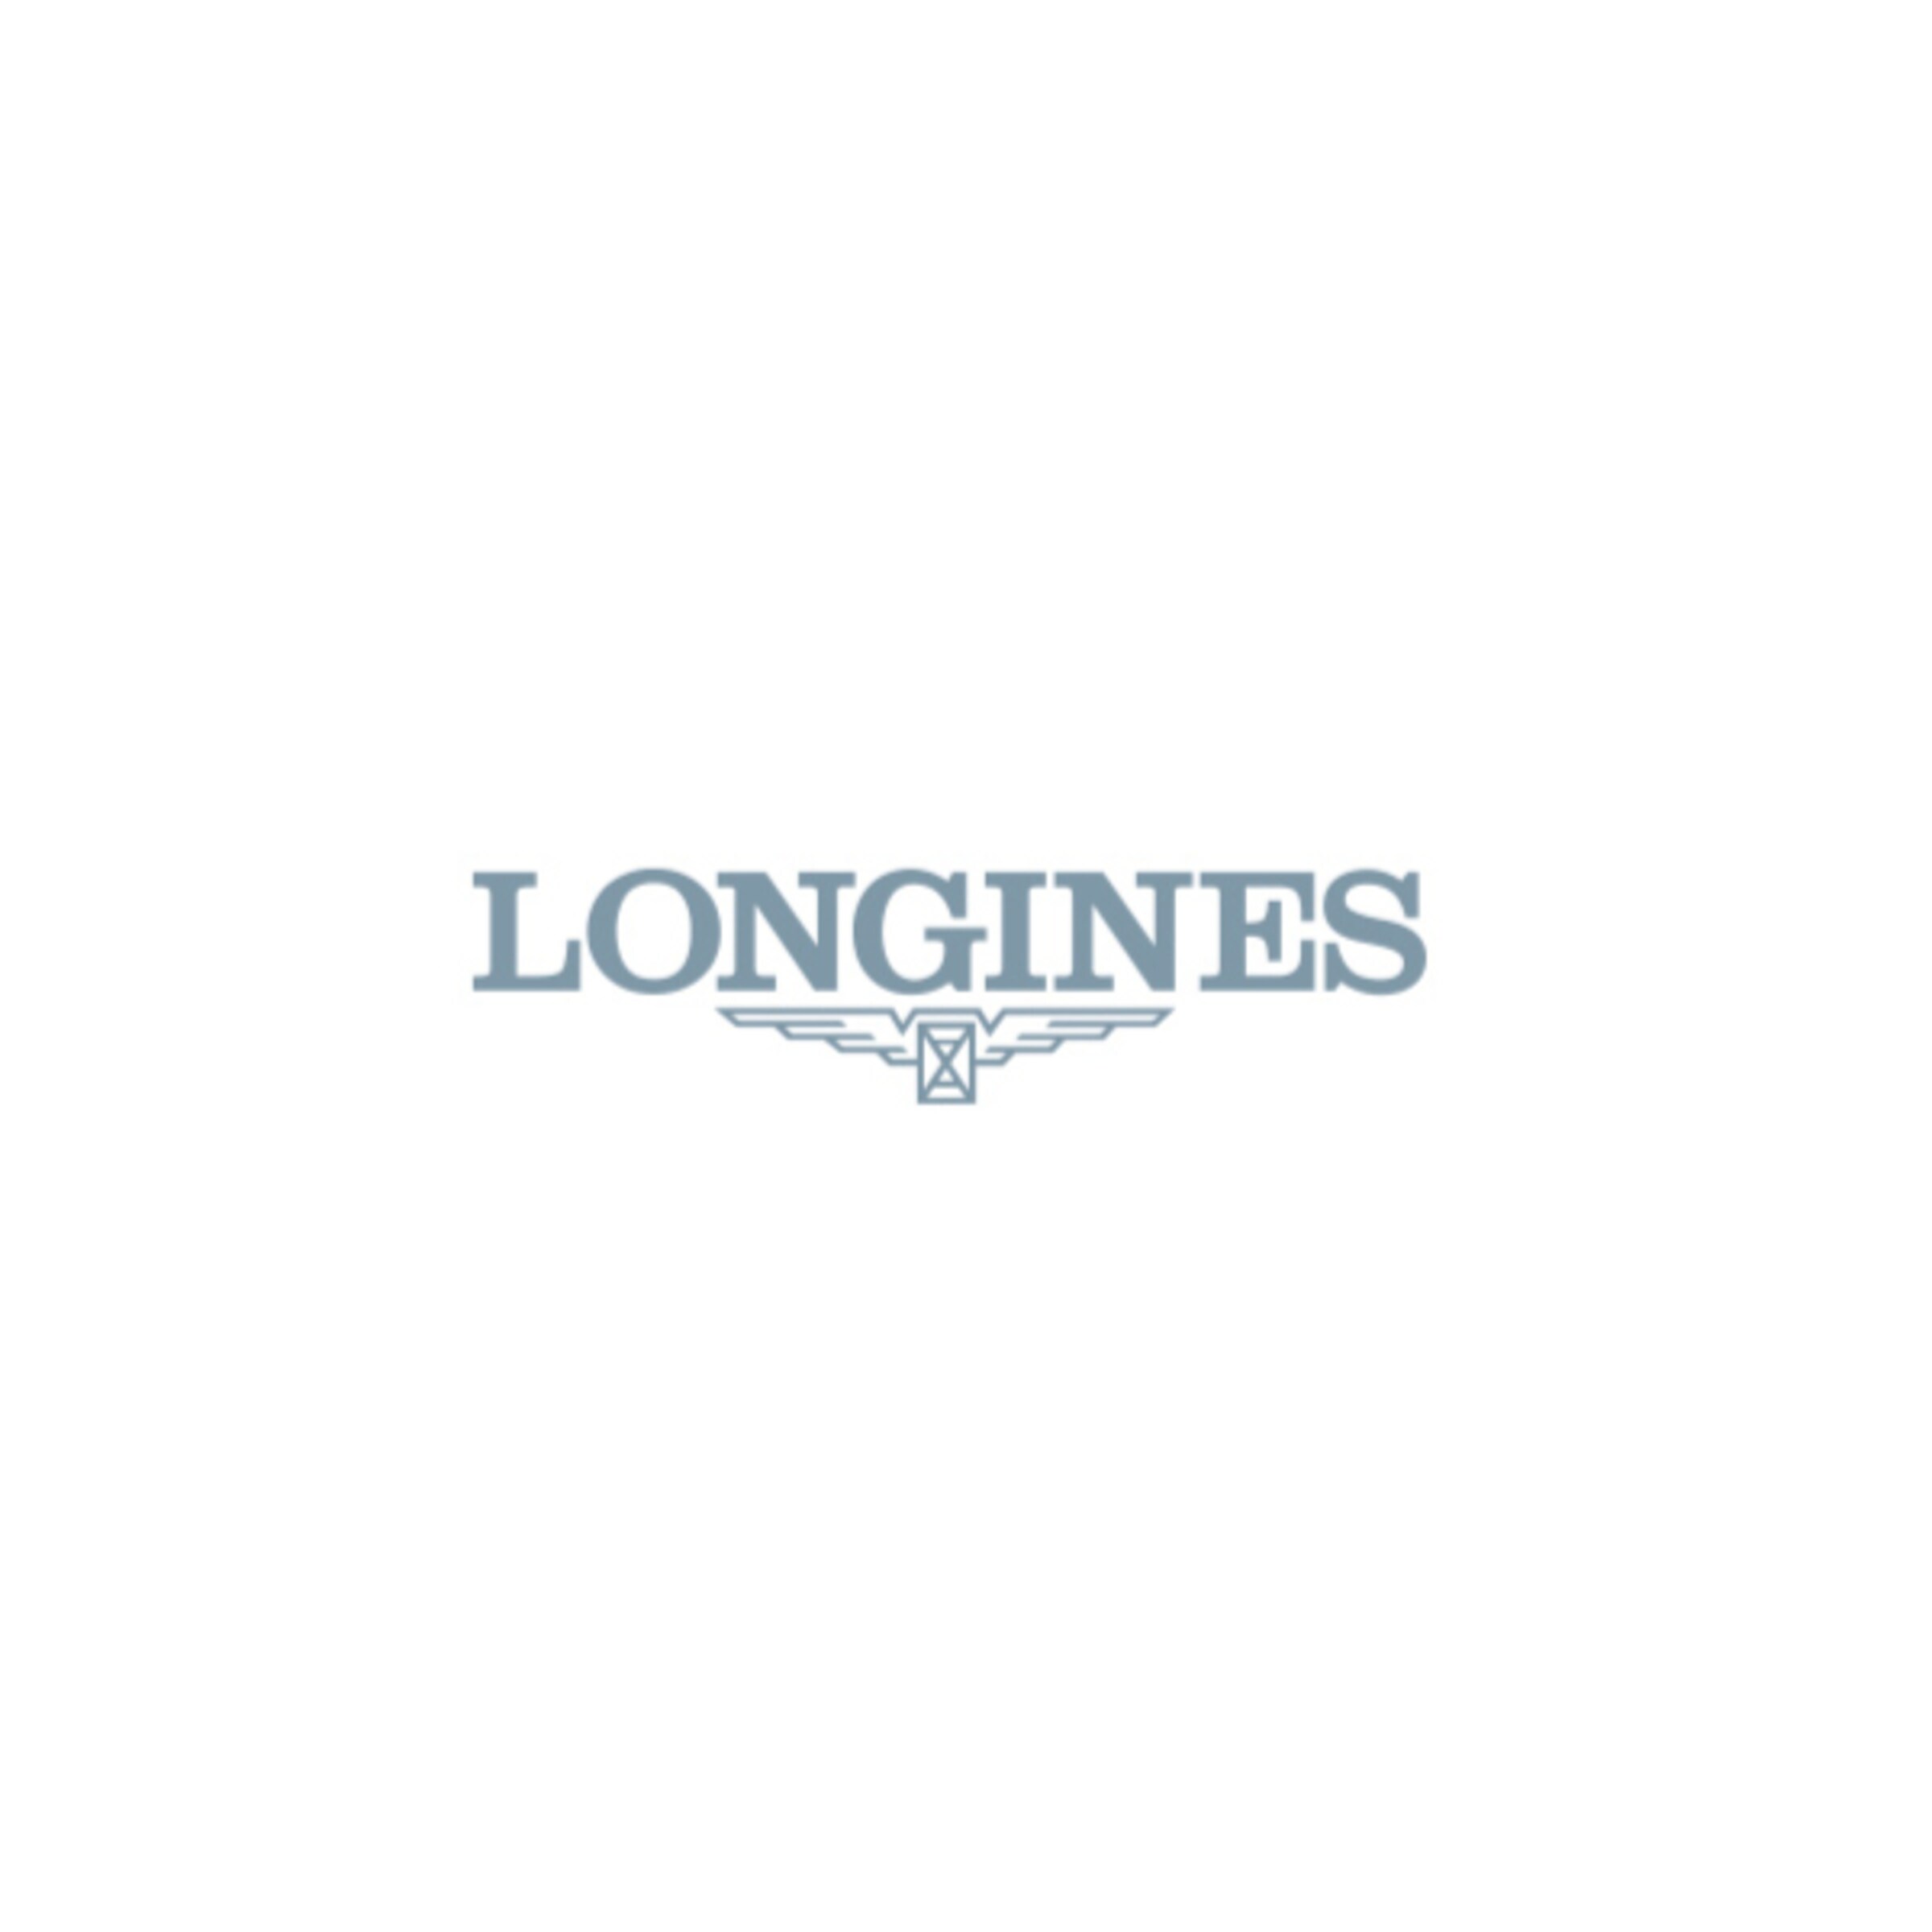 Longines THE LONGINES LEGEND DIVER WATCH Automatic Stainless steel Watch - L3.374.4.30.2